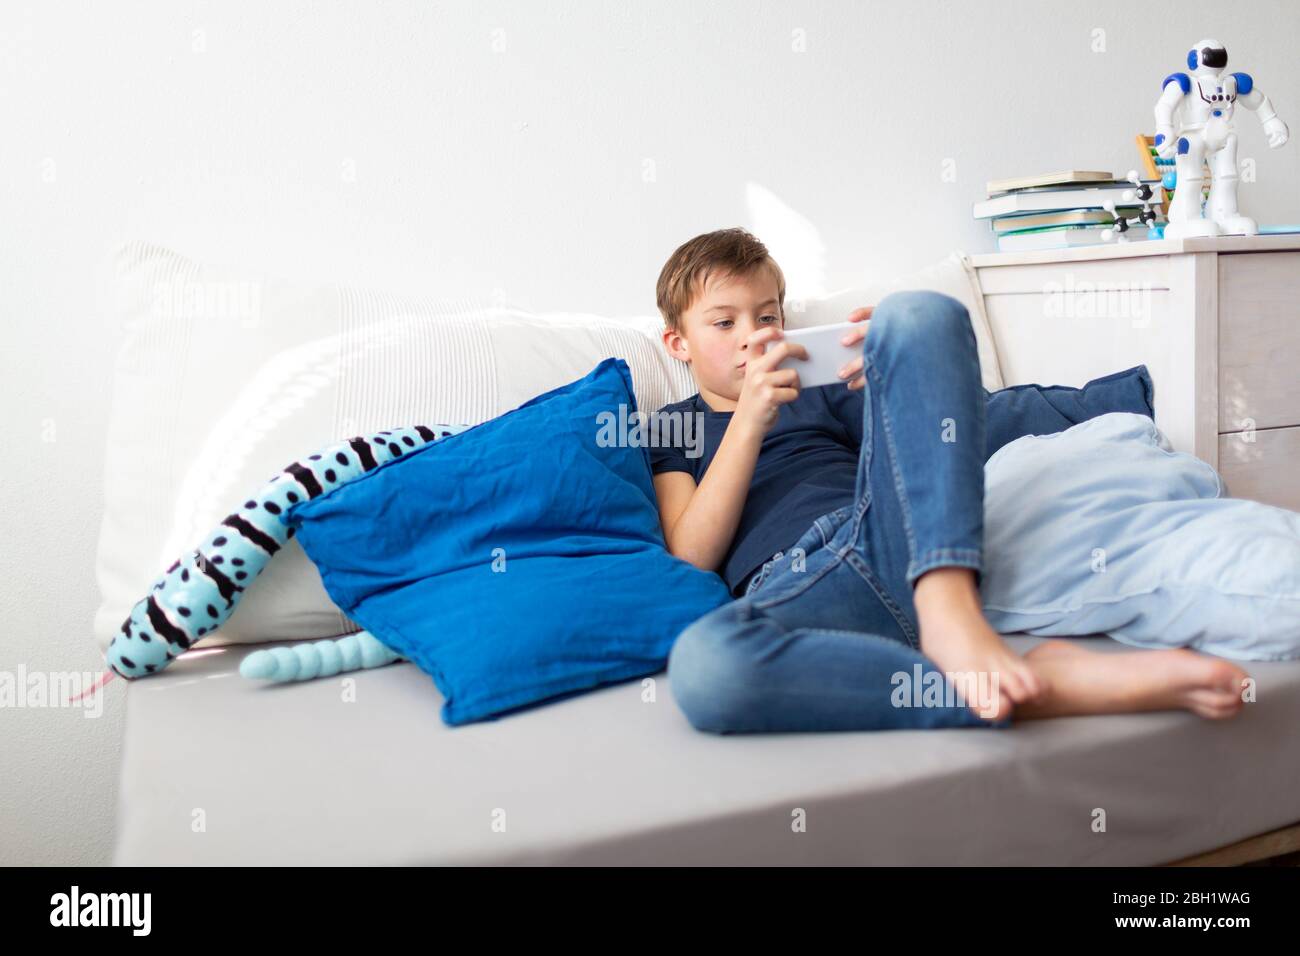 Boy playing with his smartphone during the corona crisis Stock Photo